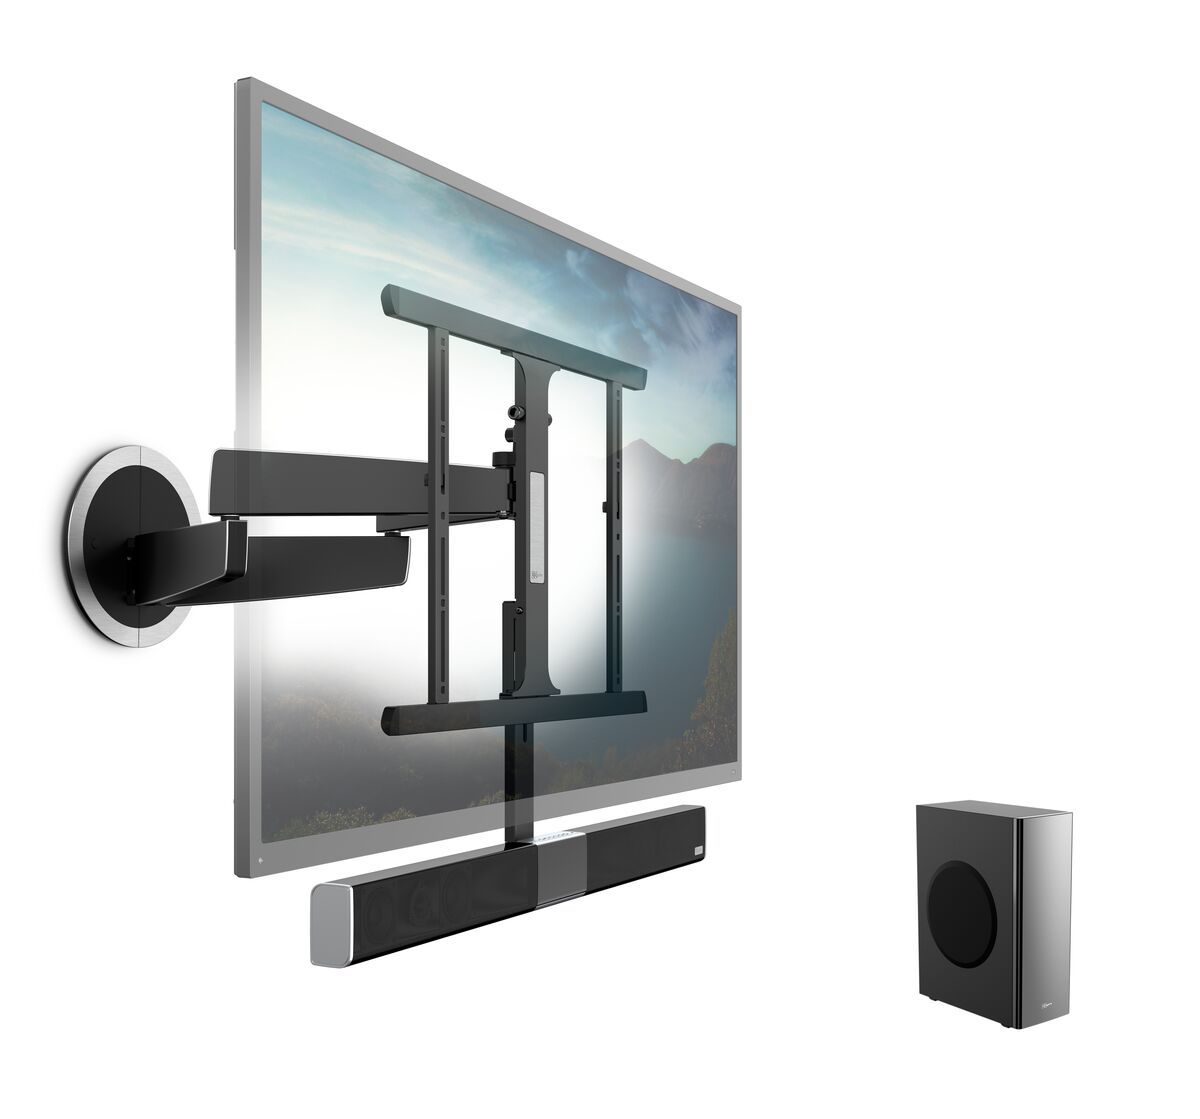 Vogel's SoundMount (NEXT 8365 AU) Full-Motion TV Wall Mount with Integrated Sound 40 65 Motion (up to 120°) Product